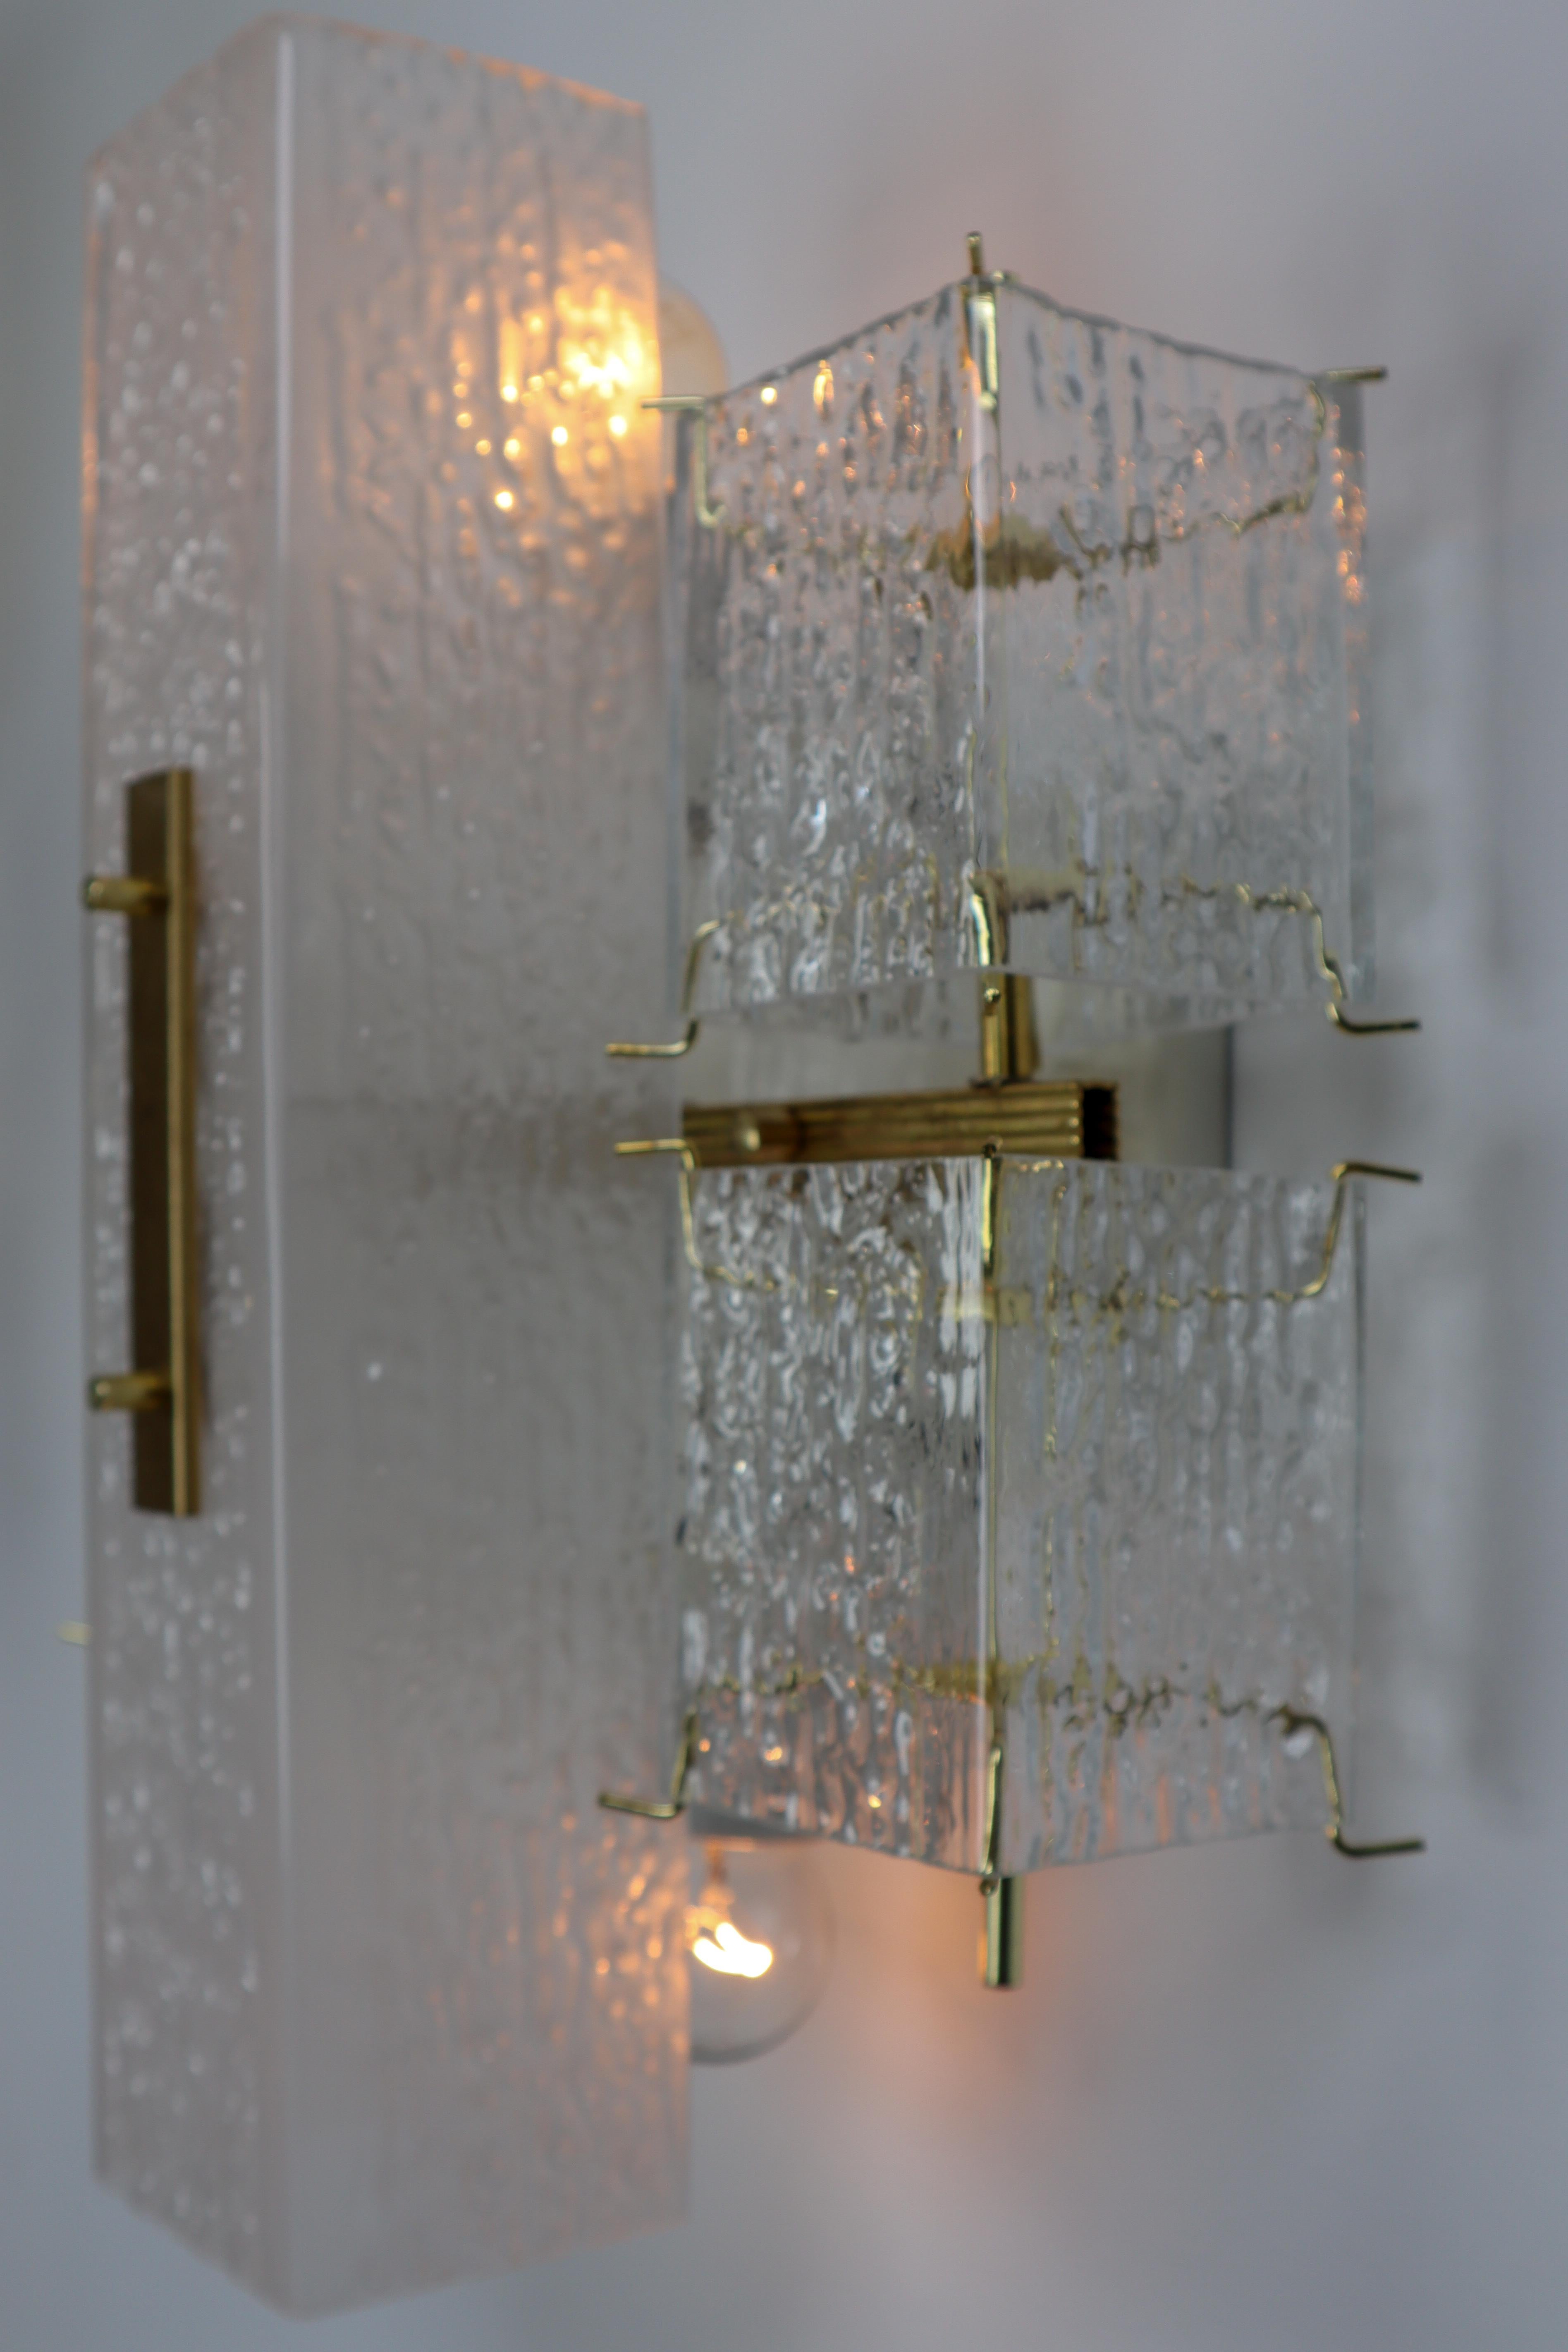 Eight Midcentury Wall Lights with Structured Glass and Brass, Europe 1970s For Sale 4